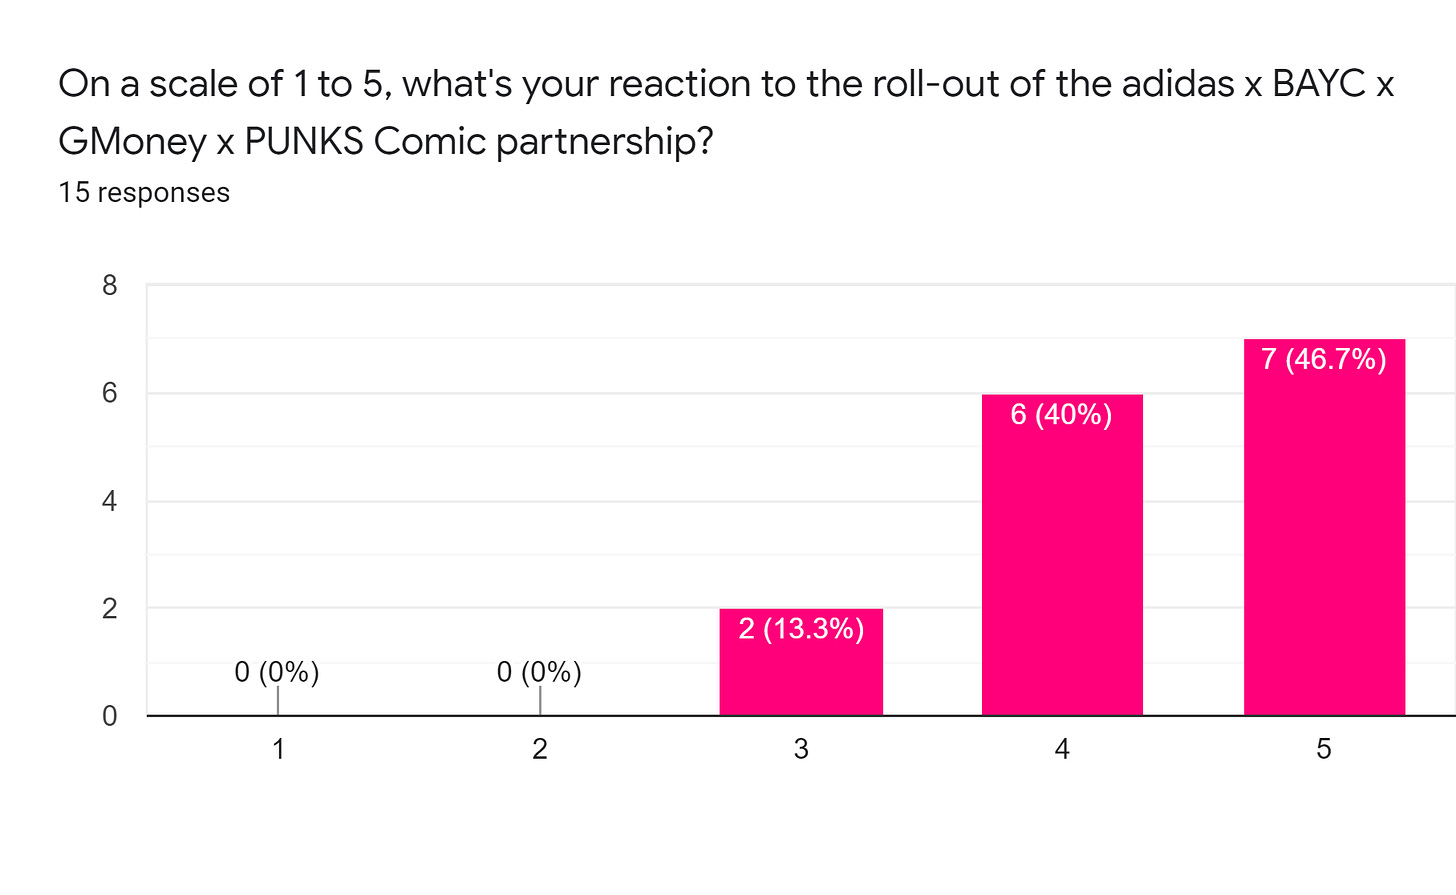 Forms response chart. Question title: On a scale of 1 to 5, what's your reaction to the roll-out of the adidas x BAYC x GMoney x PUNKS Comic partnership?. Number of responses: 15 responses.